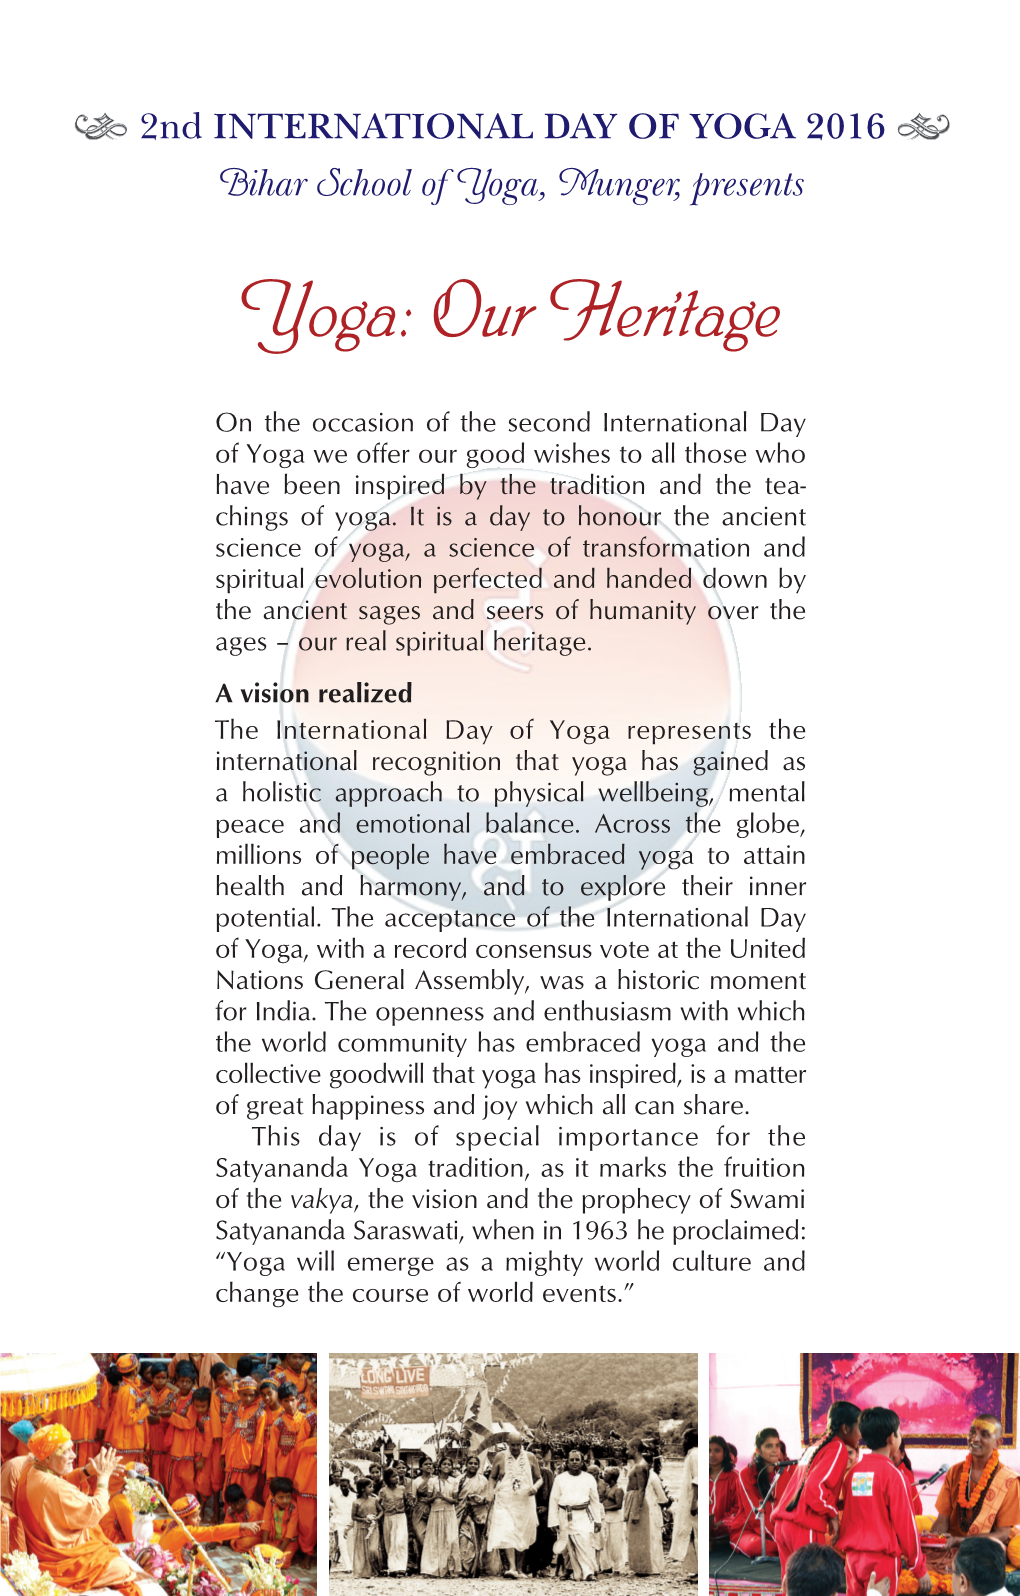 Yoga: Our Heritage